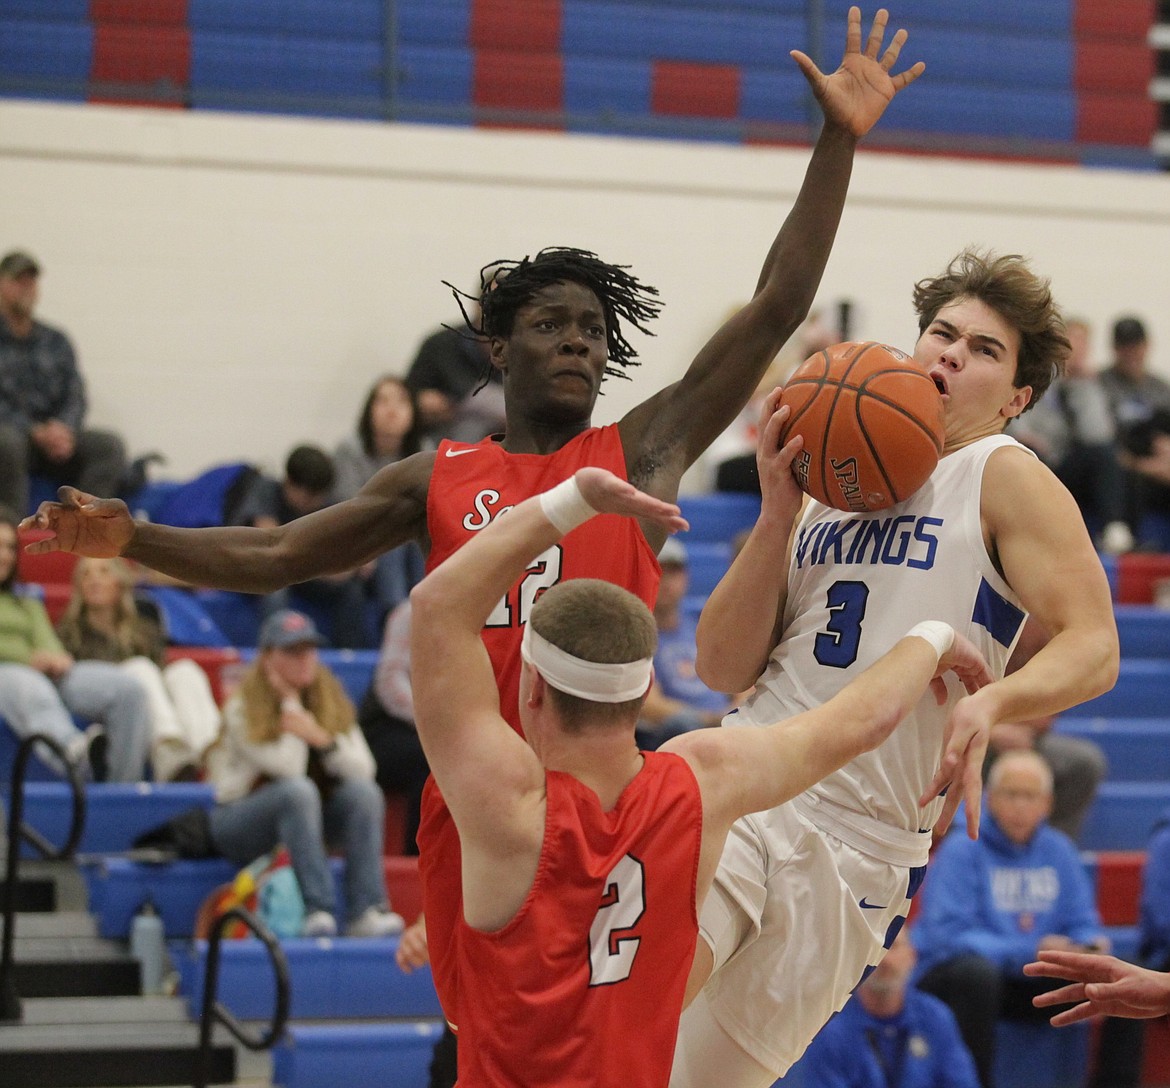 MARK NELKE/Press
Kruz Wheeler (3) of Coeur d’Alene goes up for a shot, surrounded by Ferris players Sam Markham (2) and Fareed Lawal, rear, in the first half Thursday night at Viking Court at Coeur d’Alene High.